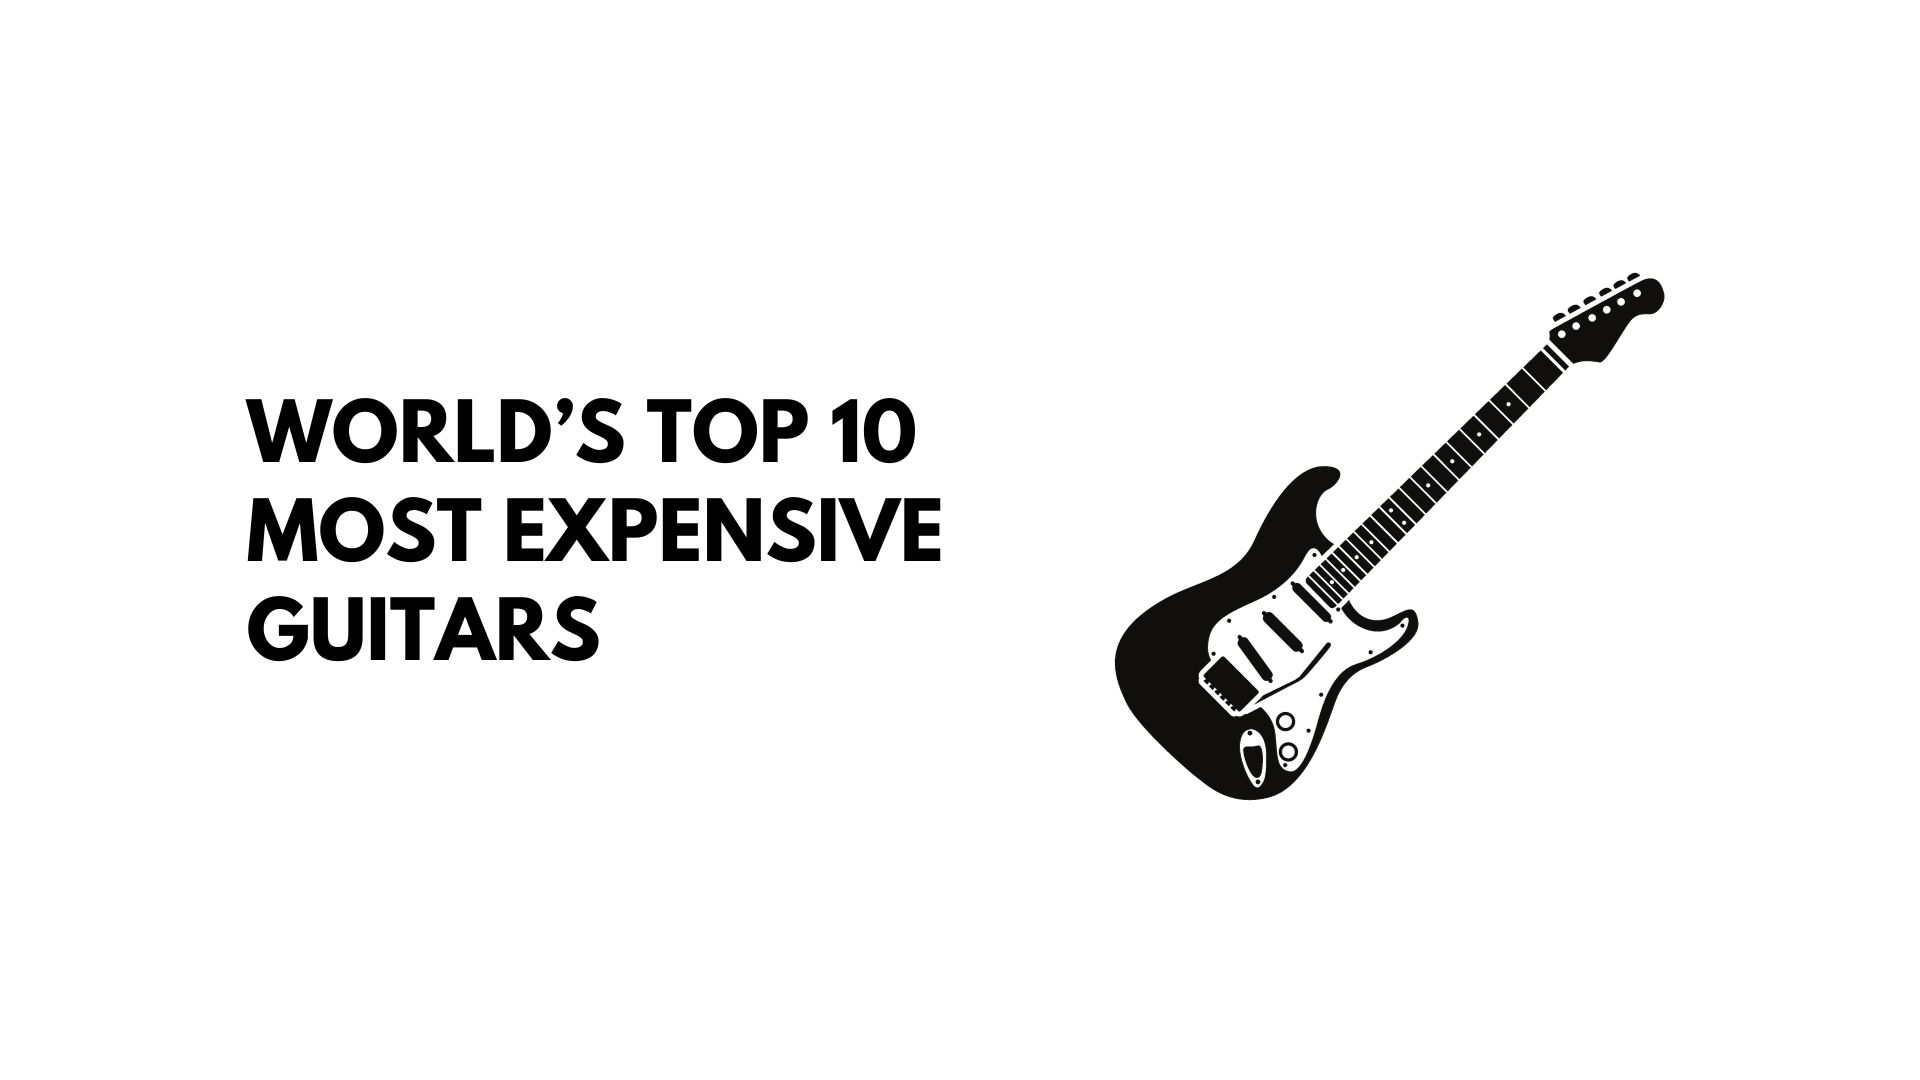 Top 10 Most Expensive Guitars In The World